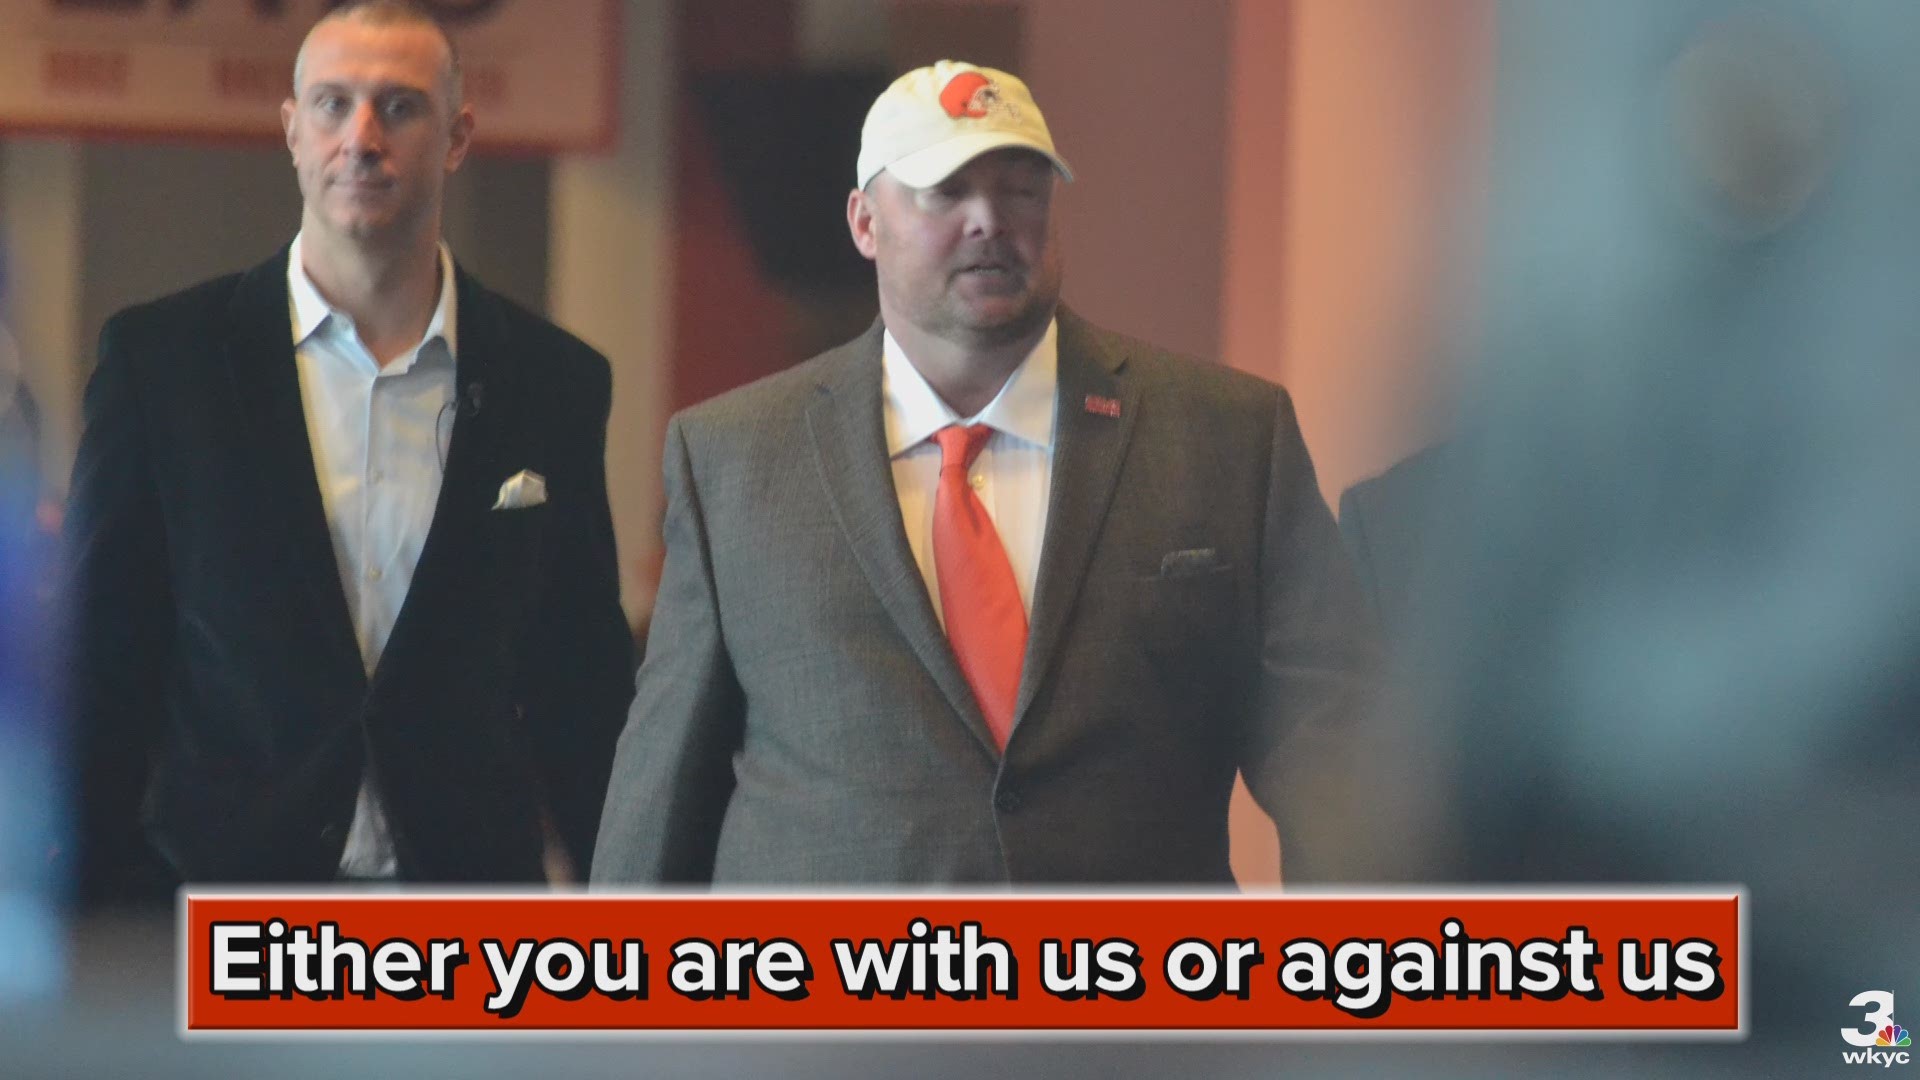 New Cleveland Browns coach Freddie Kitchens says if you are not all in on brown and orange, you do not matter.